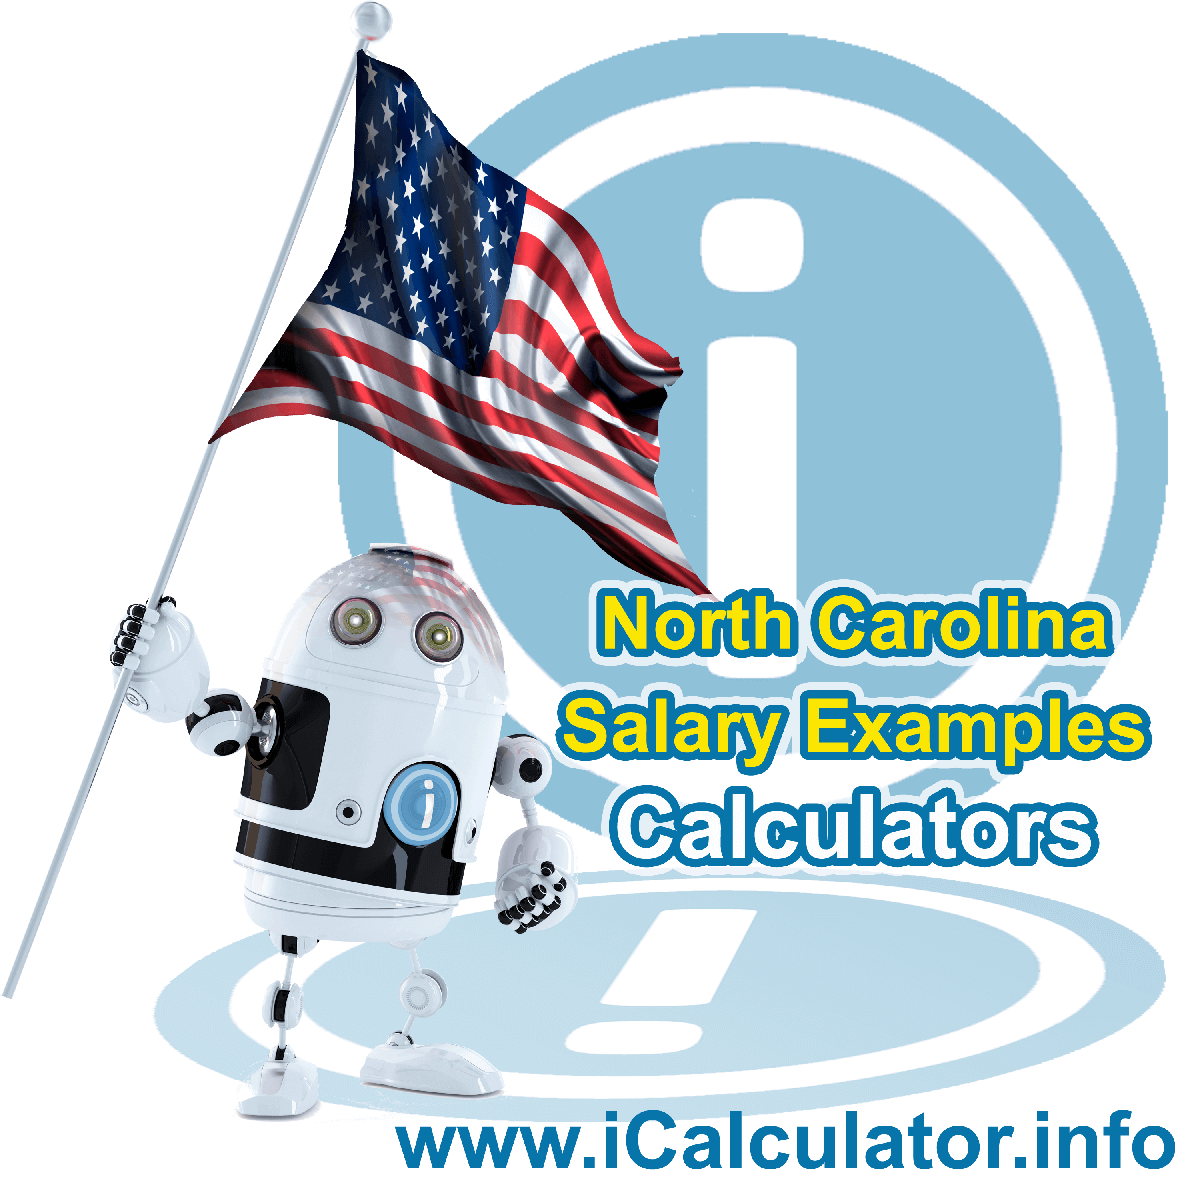 North Carolina Salary Example for $ 190,000.00 in 2023 | iCalculator™ | $ 190,000.00 salary example for employee and employer paying North Carolina State tincome taxes. Detailed salary after tax calculation including North Carolina State Tax, Federal State Tax, Medicare Deductions, Social Security, Capital Gains and other income tax and salary deductions complete with supporting North Carolina state tax tables 